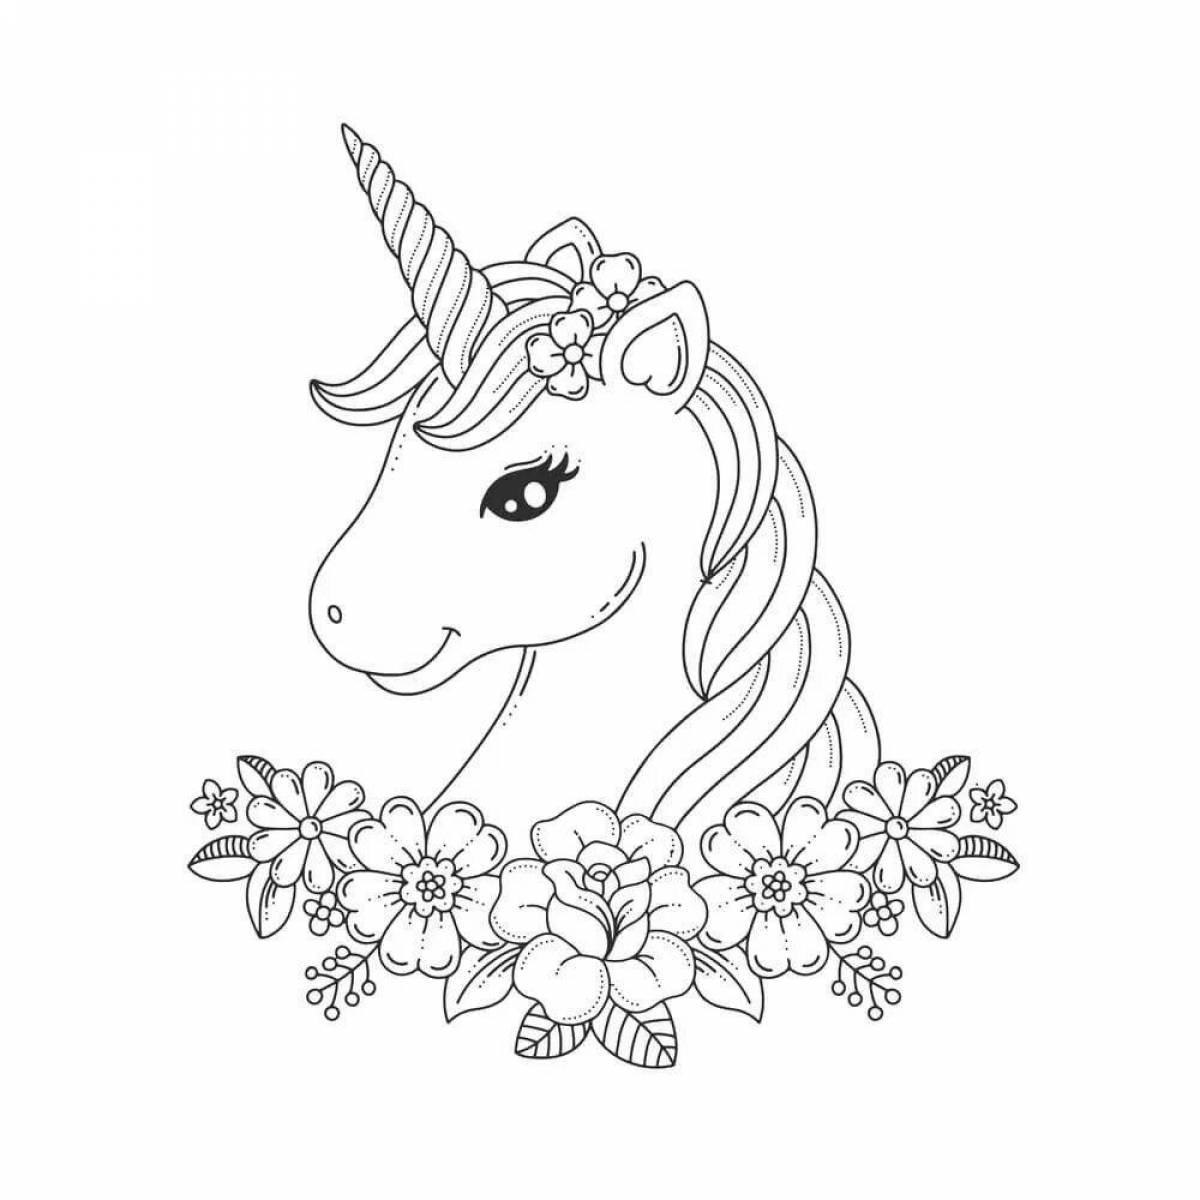 Delightful coloring book for girls 7 years old unicorn